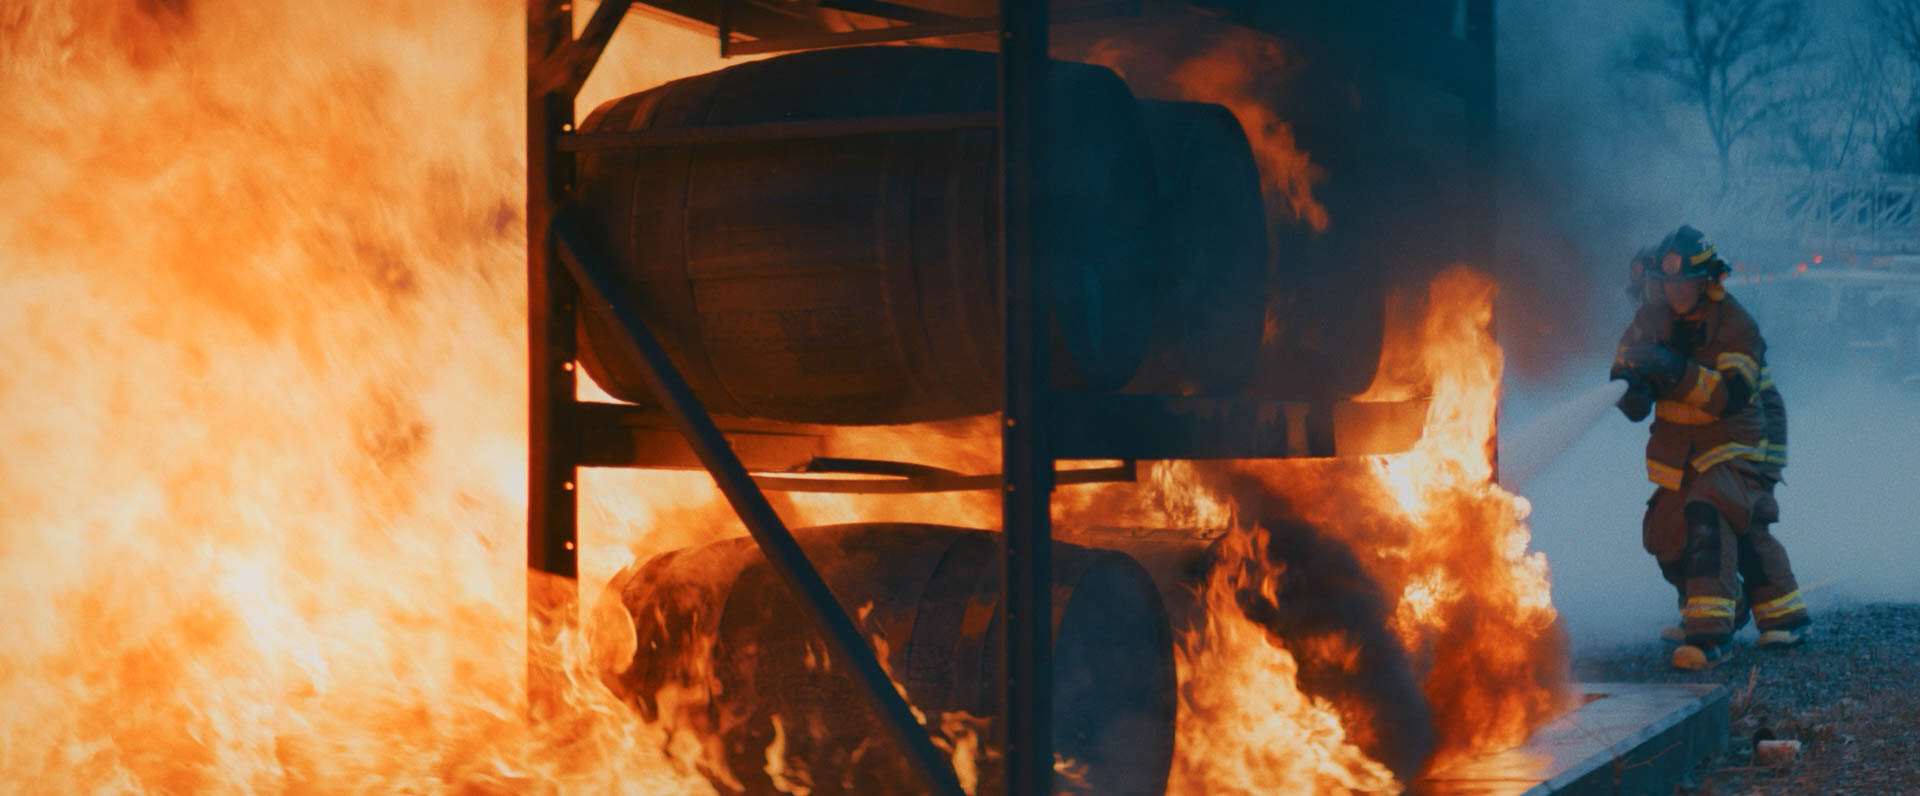 Barrels of Jack Daniel's whiskey on fire being put out by a fireman.